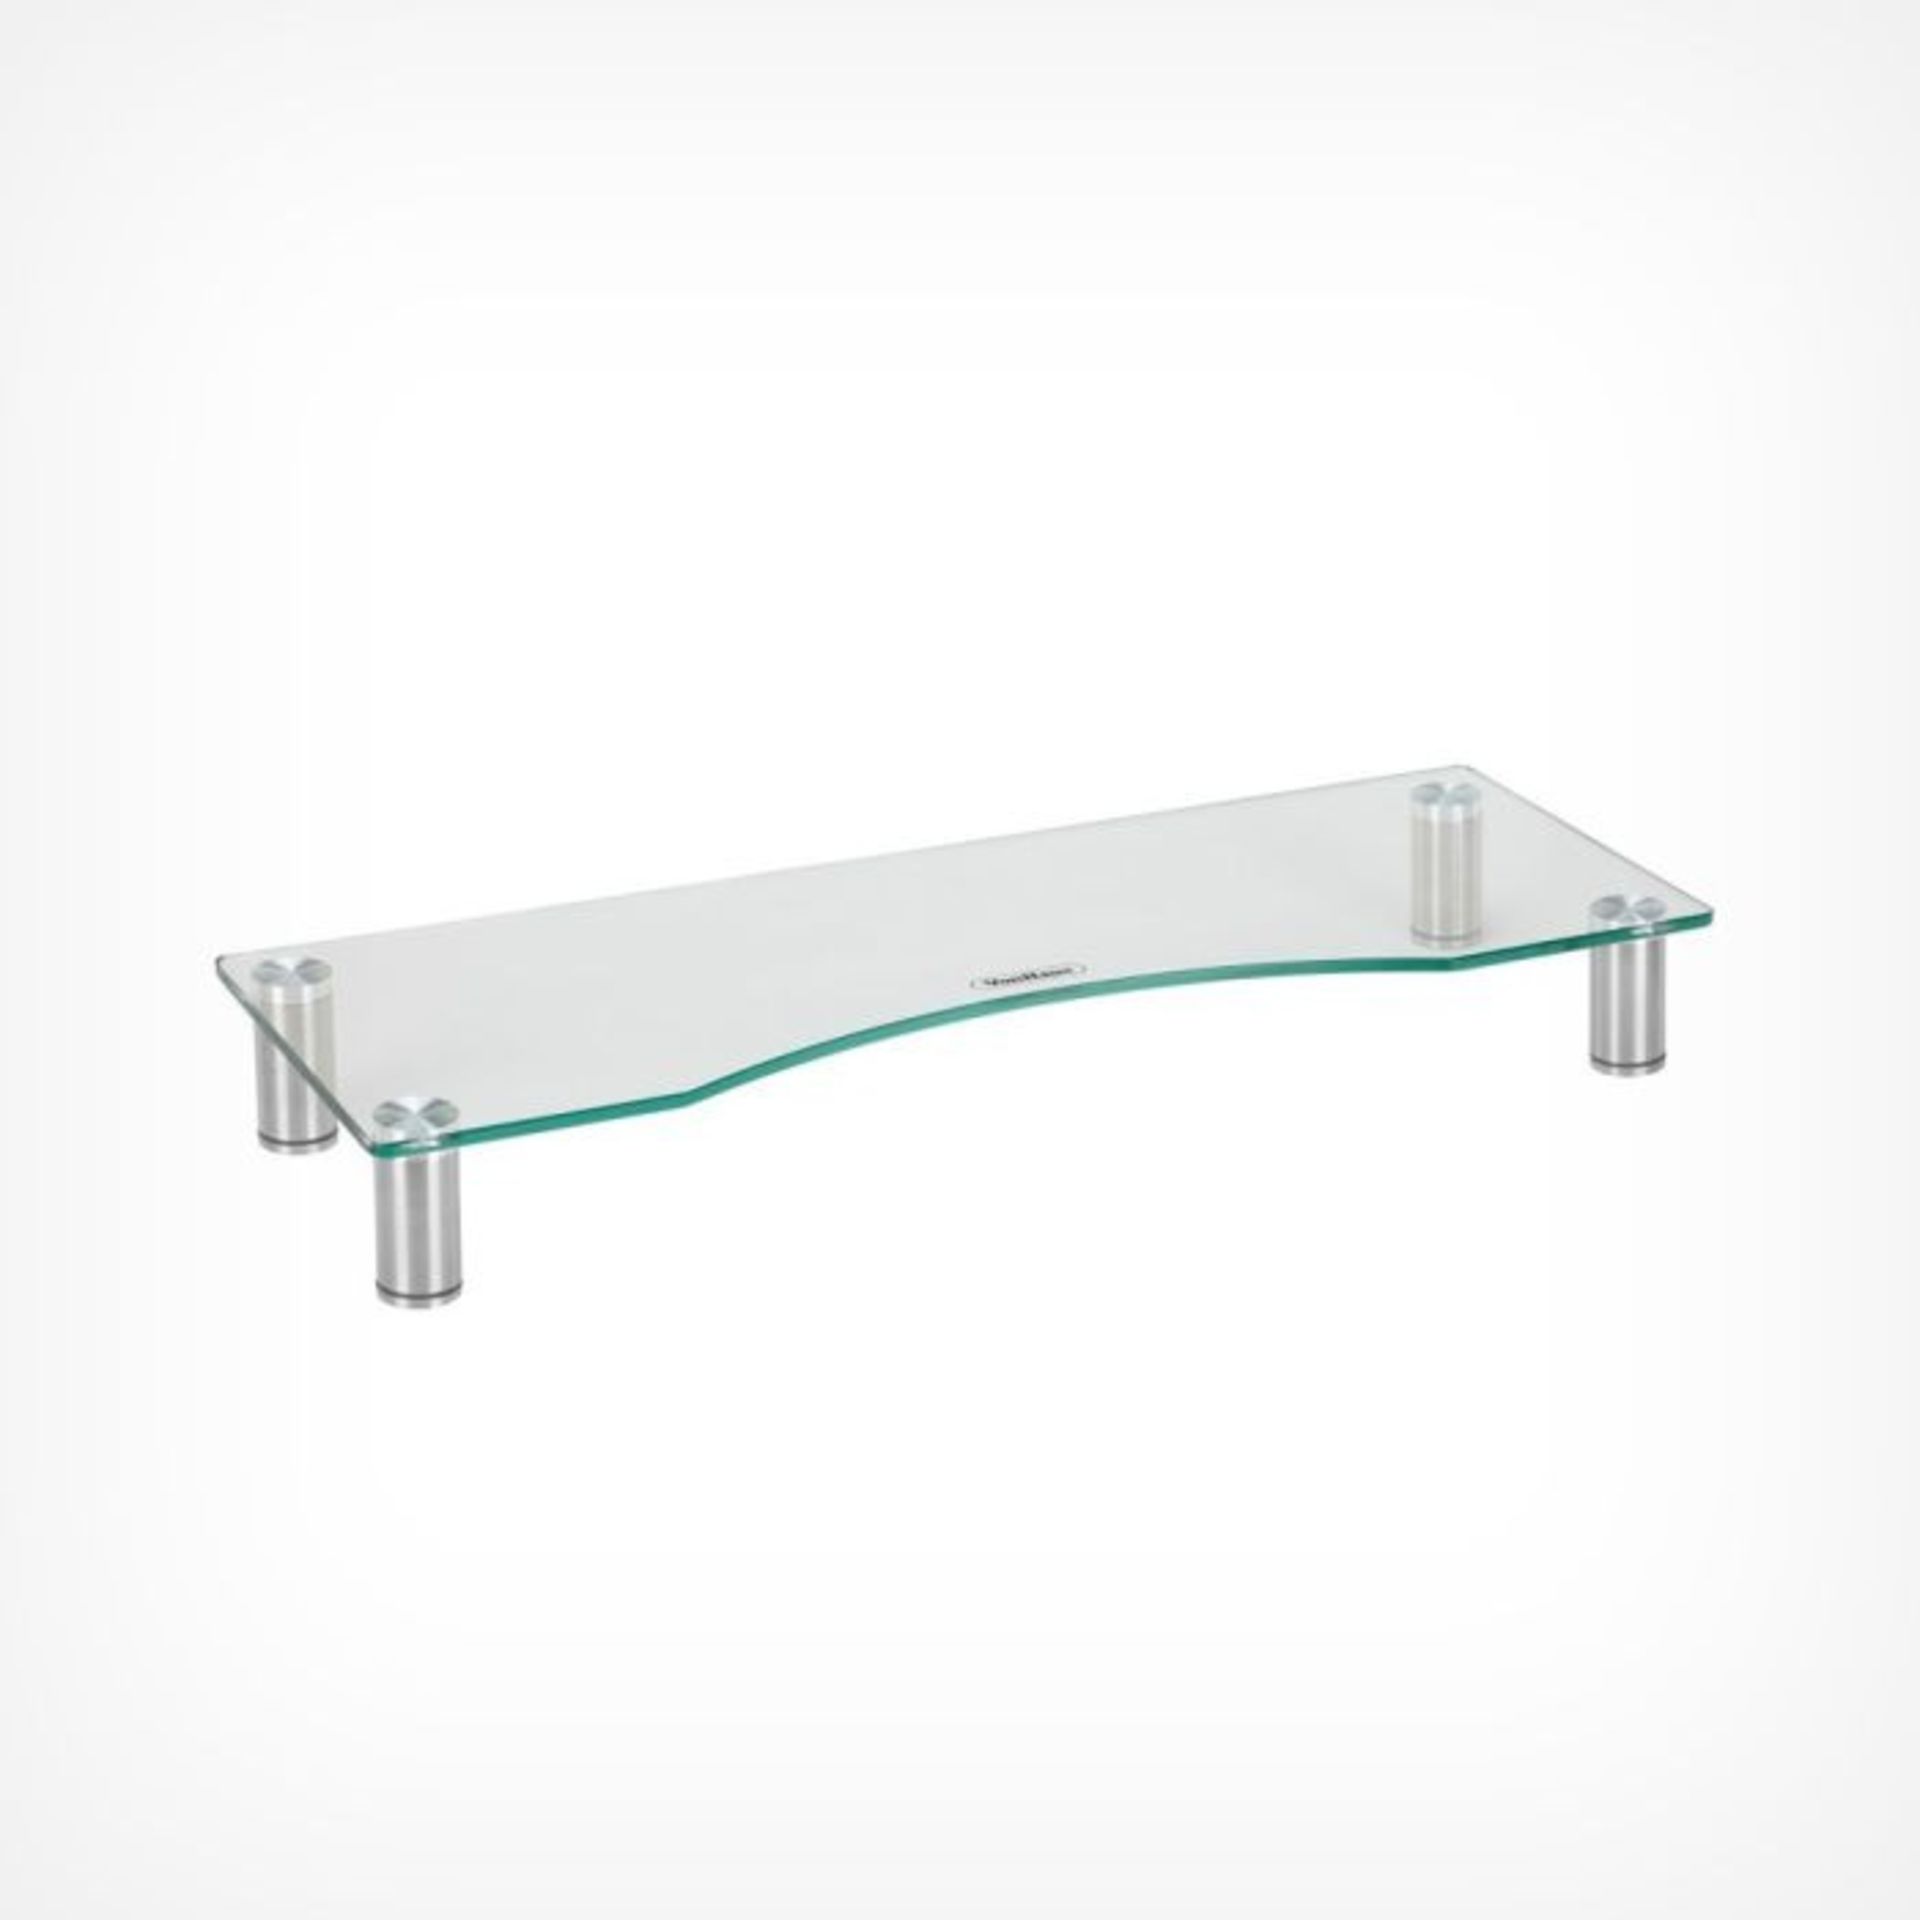 Large Glass Monitor Stand - ER23